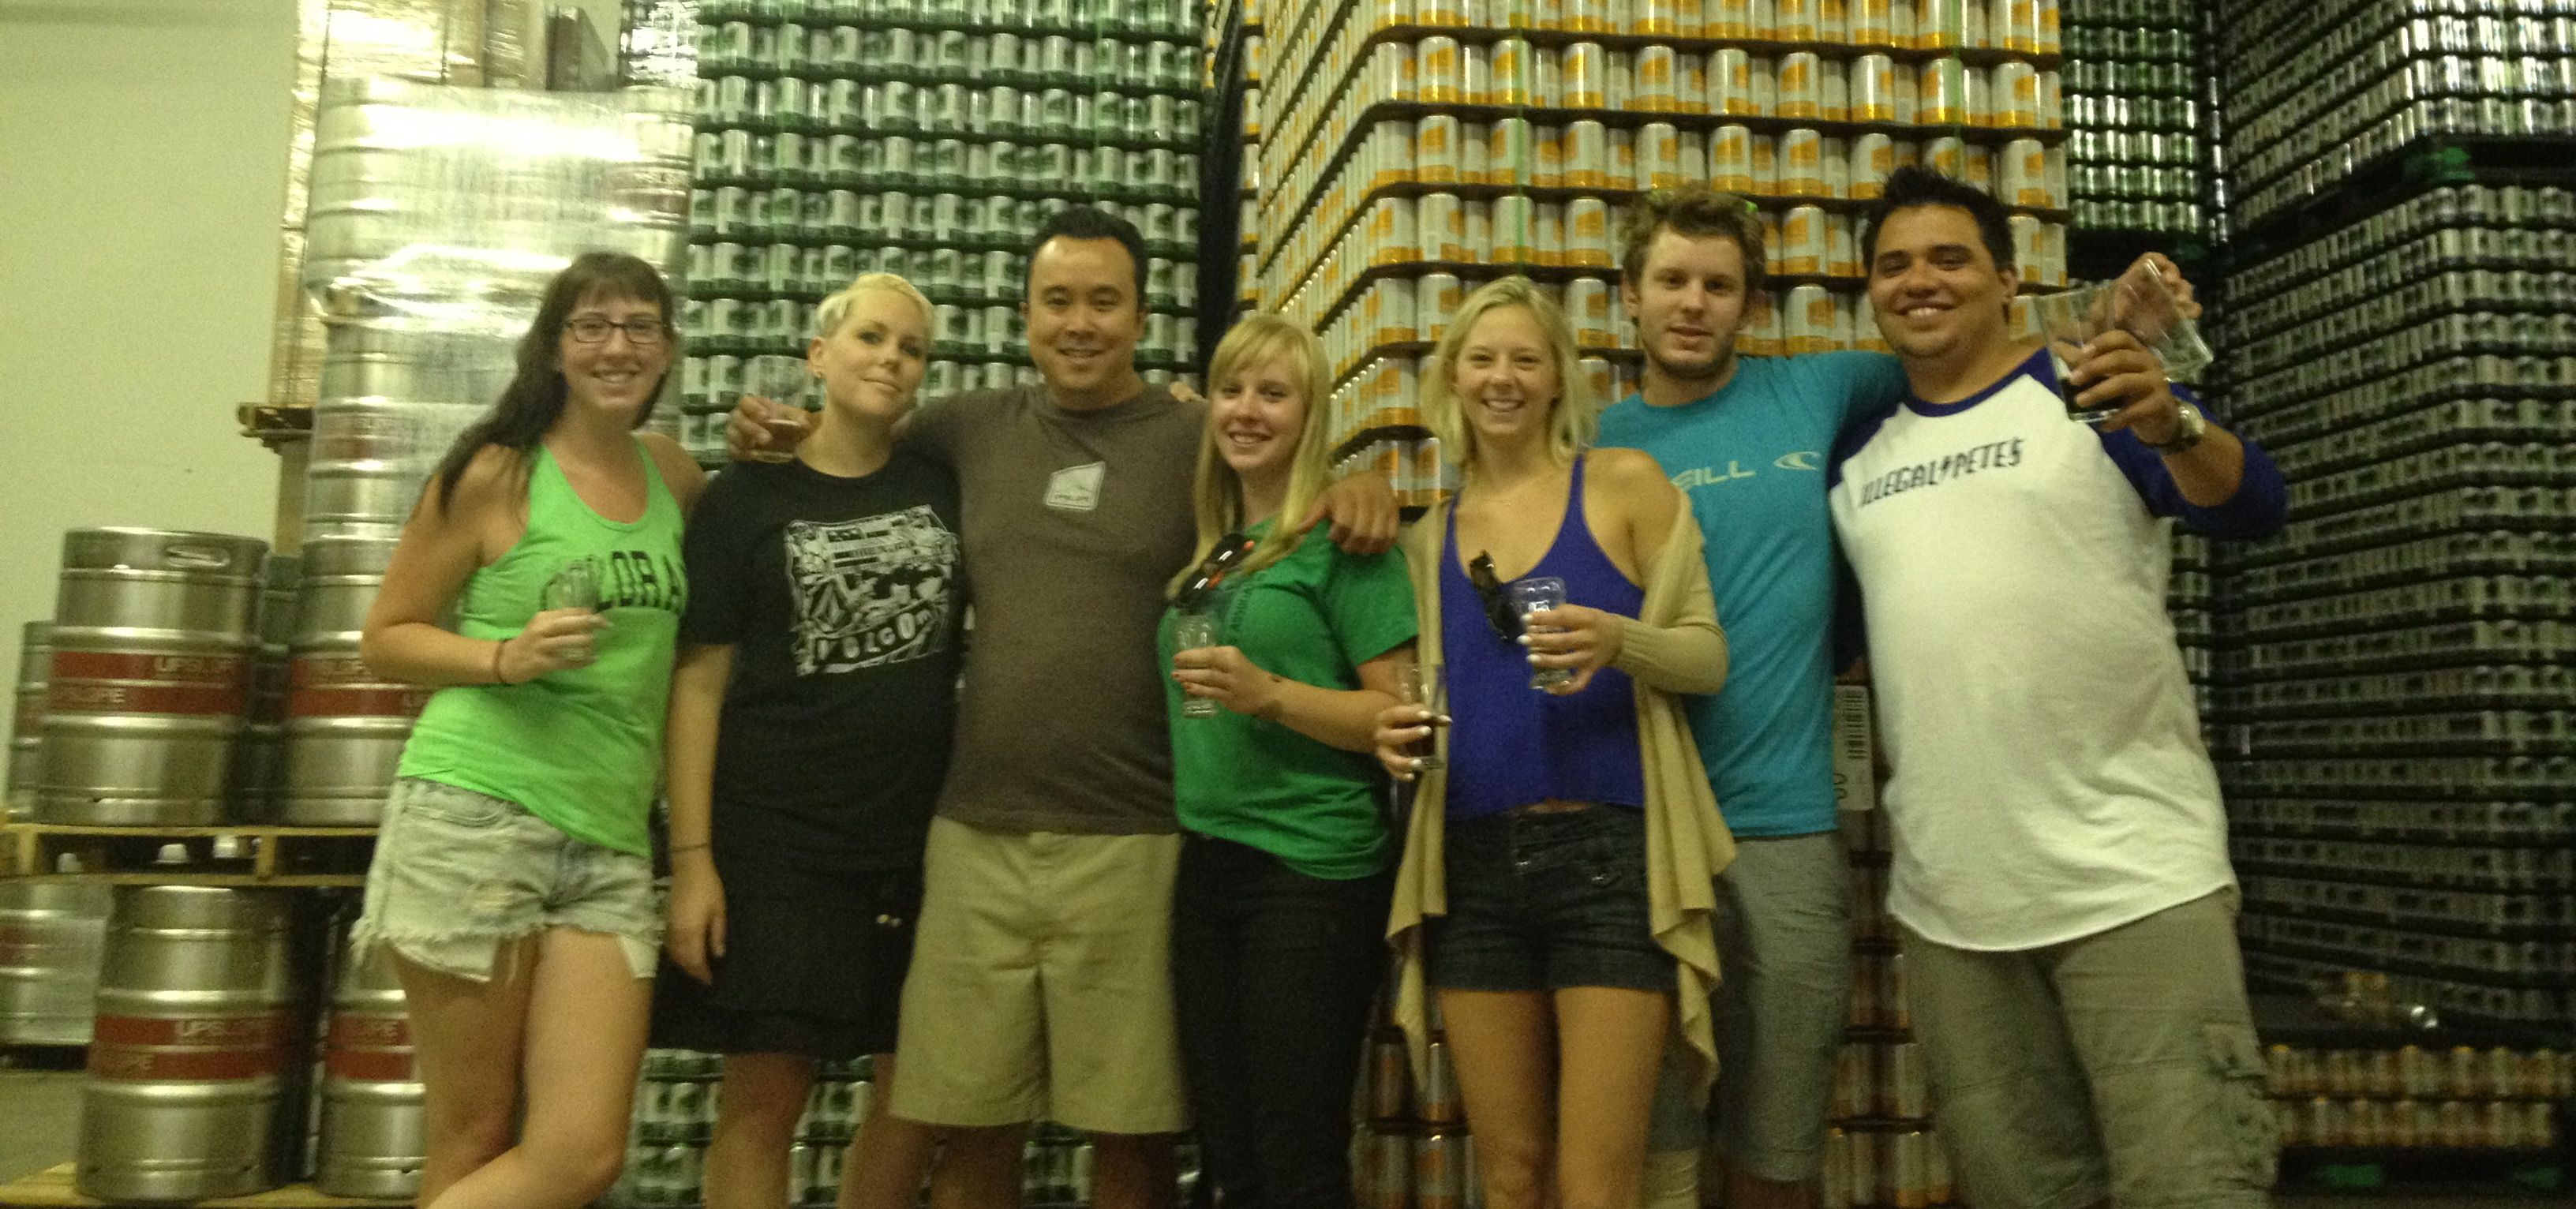 Illegal Pete’s Upslope Brewing Collaboration